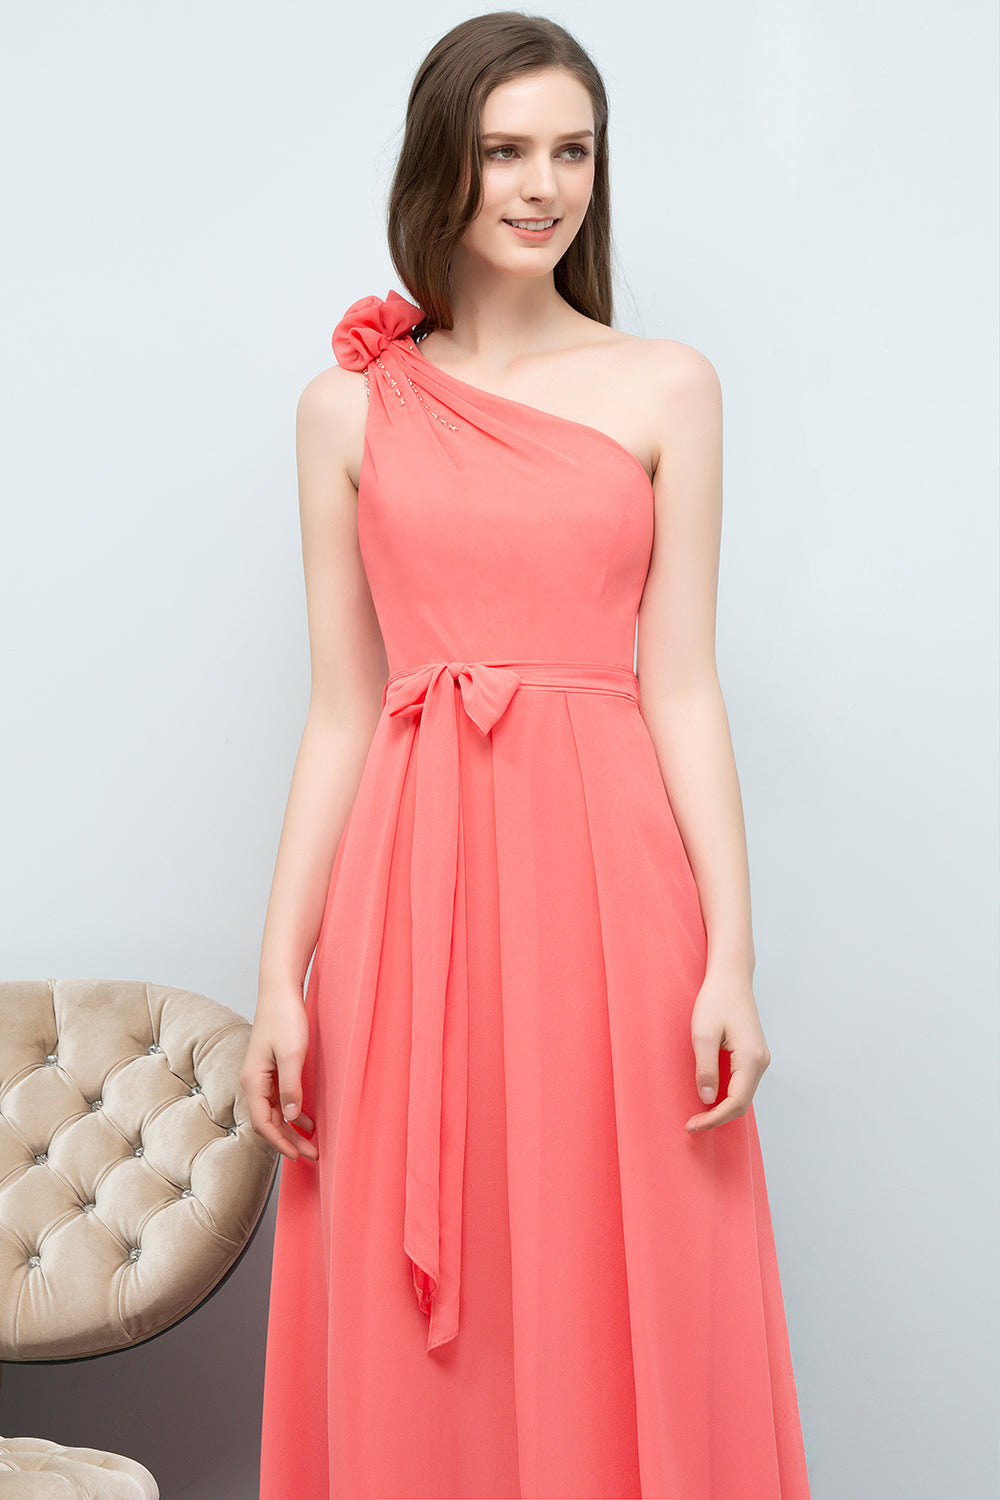 Chic One Shoulder Flower Long Bridesmaid Dresses with Bow Sash